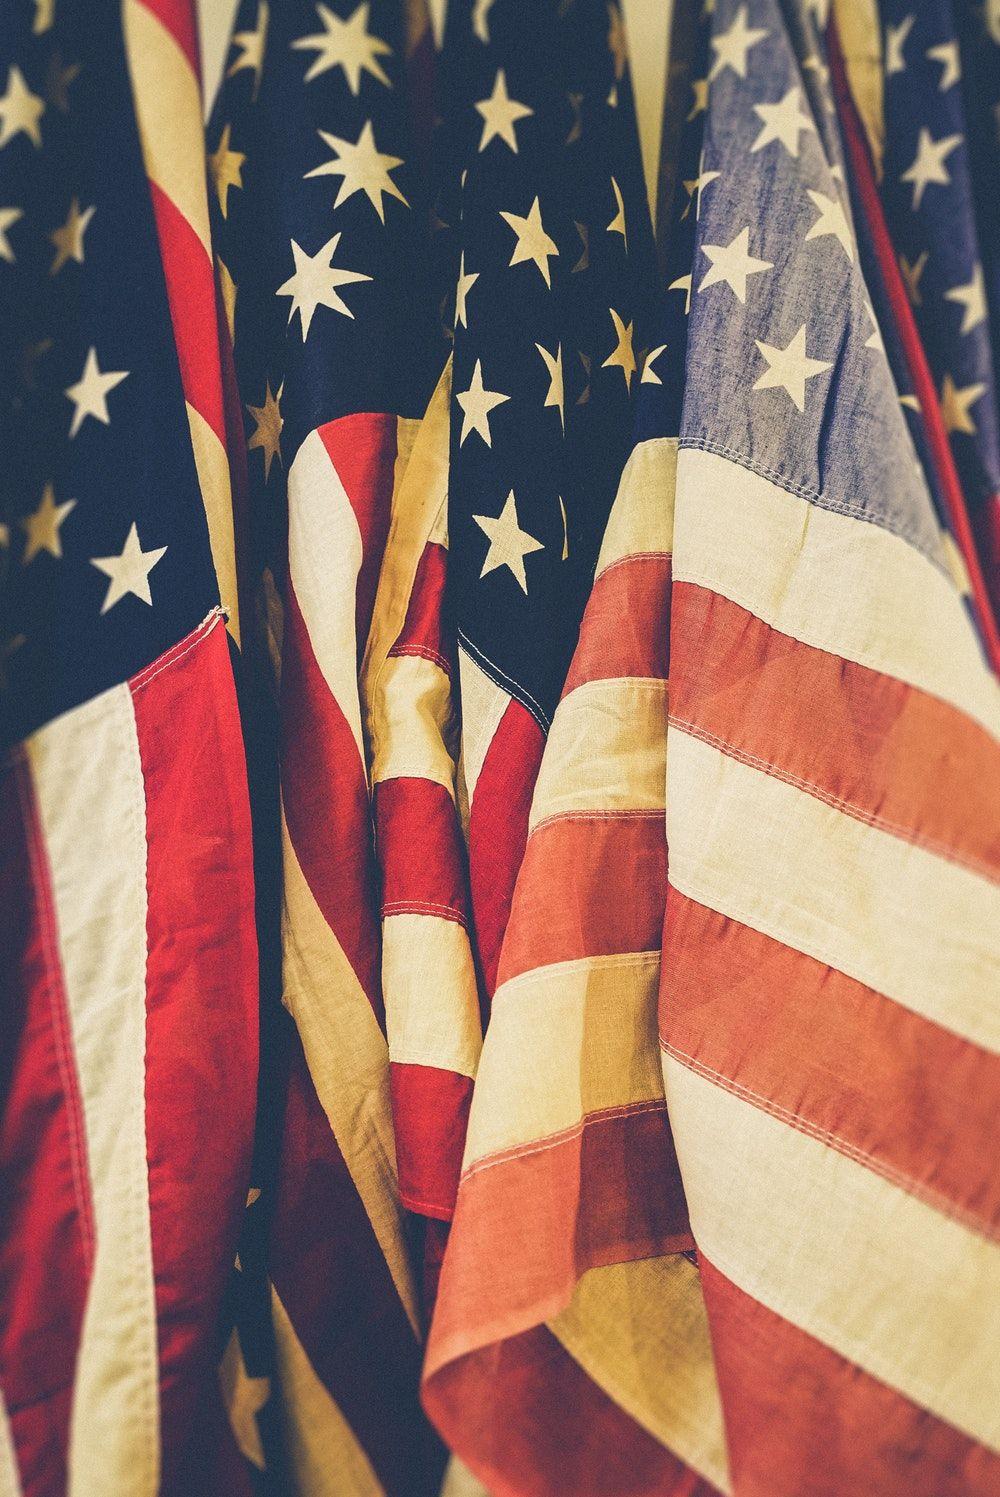 American Flag Picture. Download Free Image